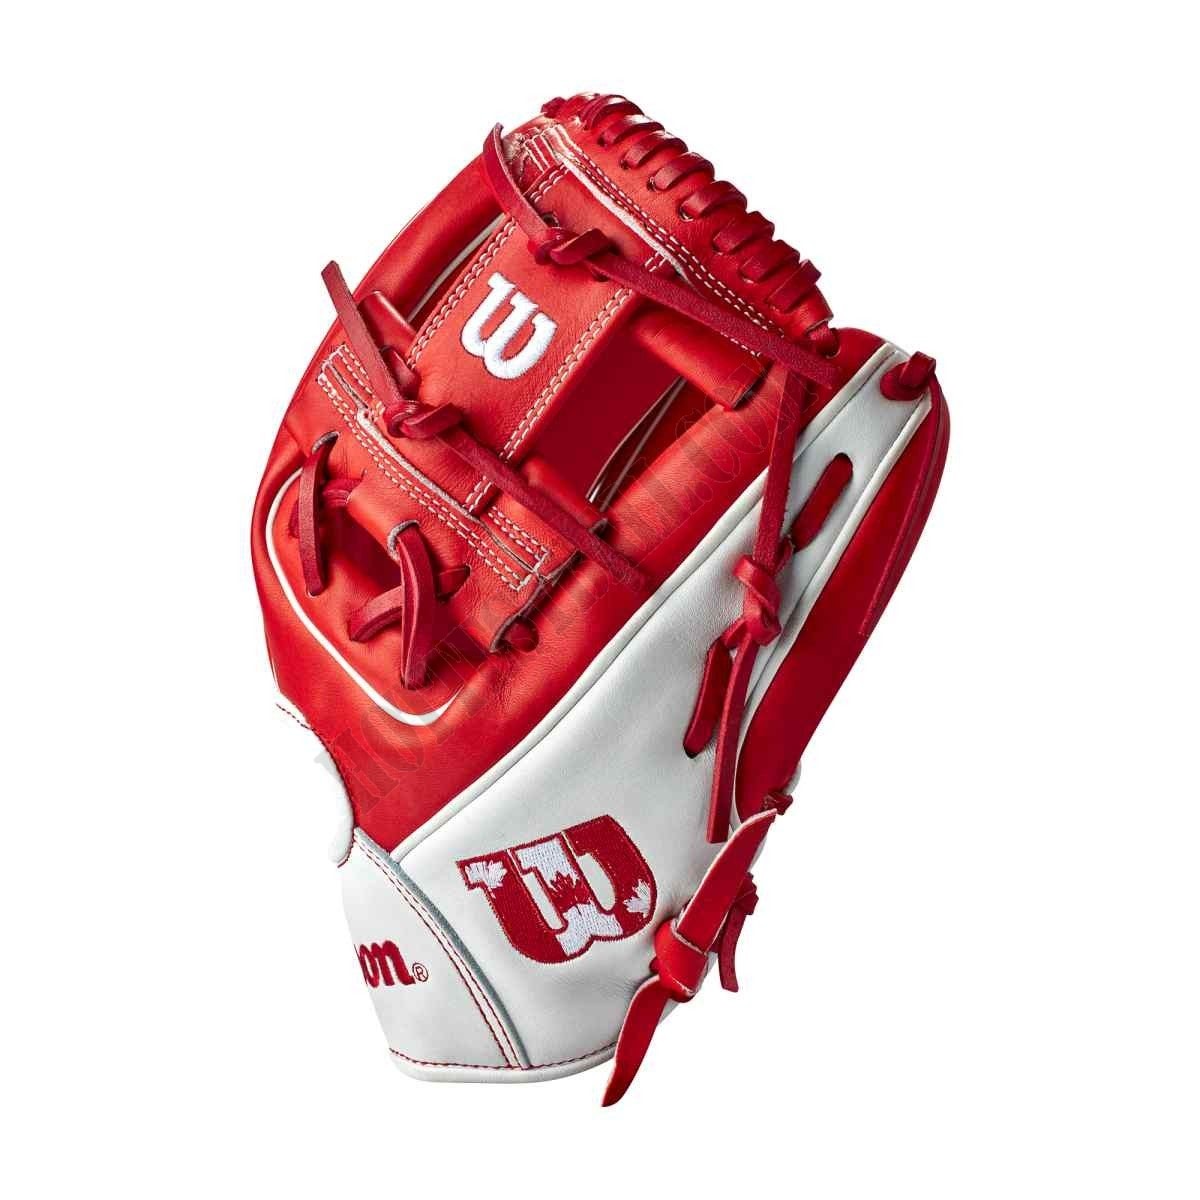 2021 A2000 1786 Canada 11.5" Infield Baseball Glove - Limited Edition ● Wilson Promotions - -3